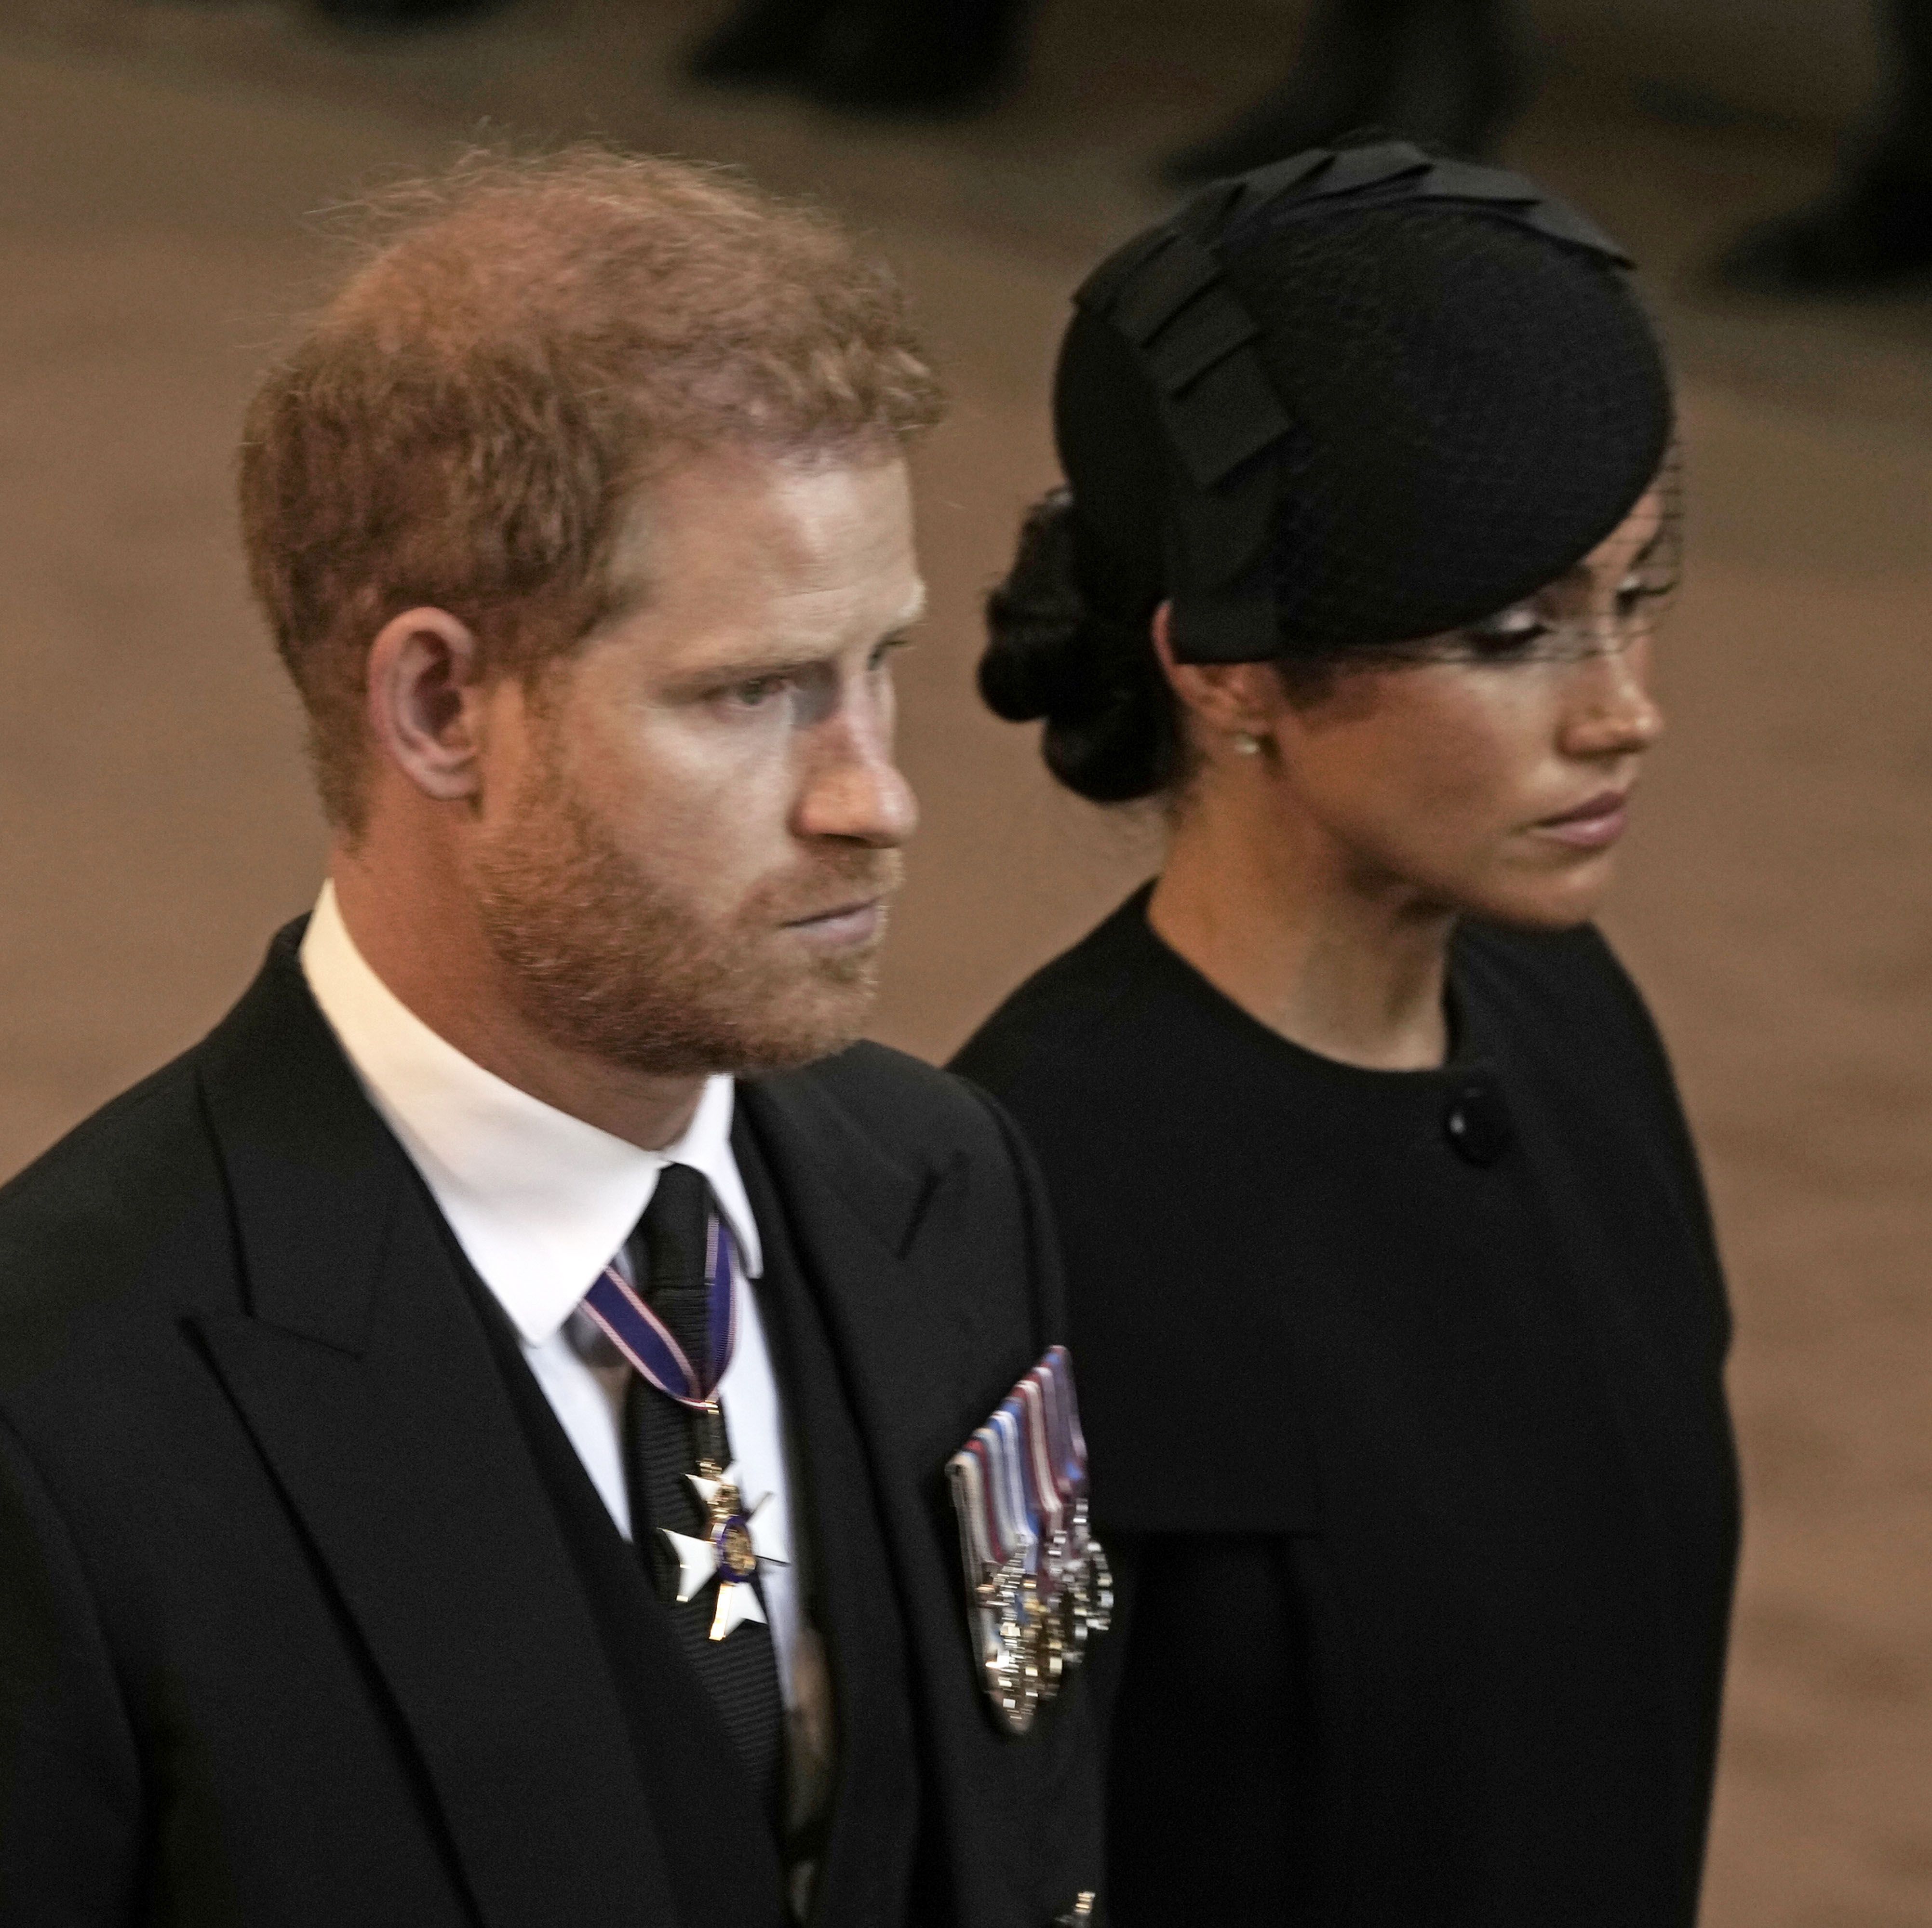 The royal family seems to be struggling with how to treat the Sussexes.